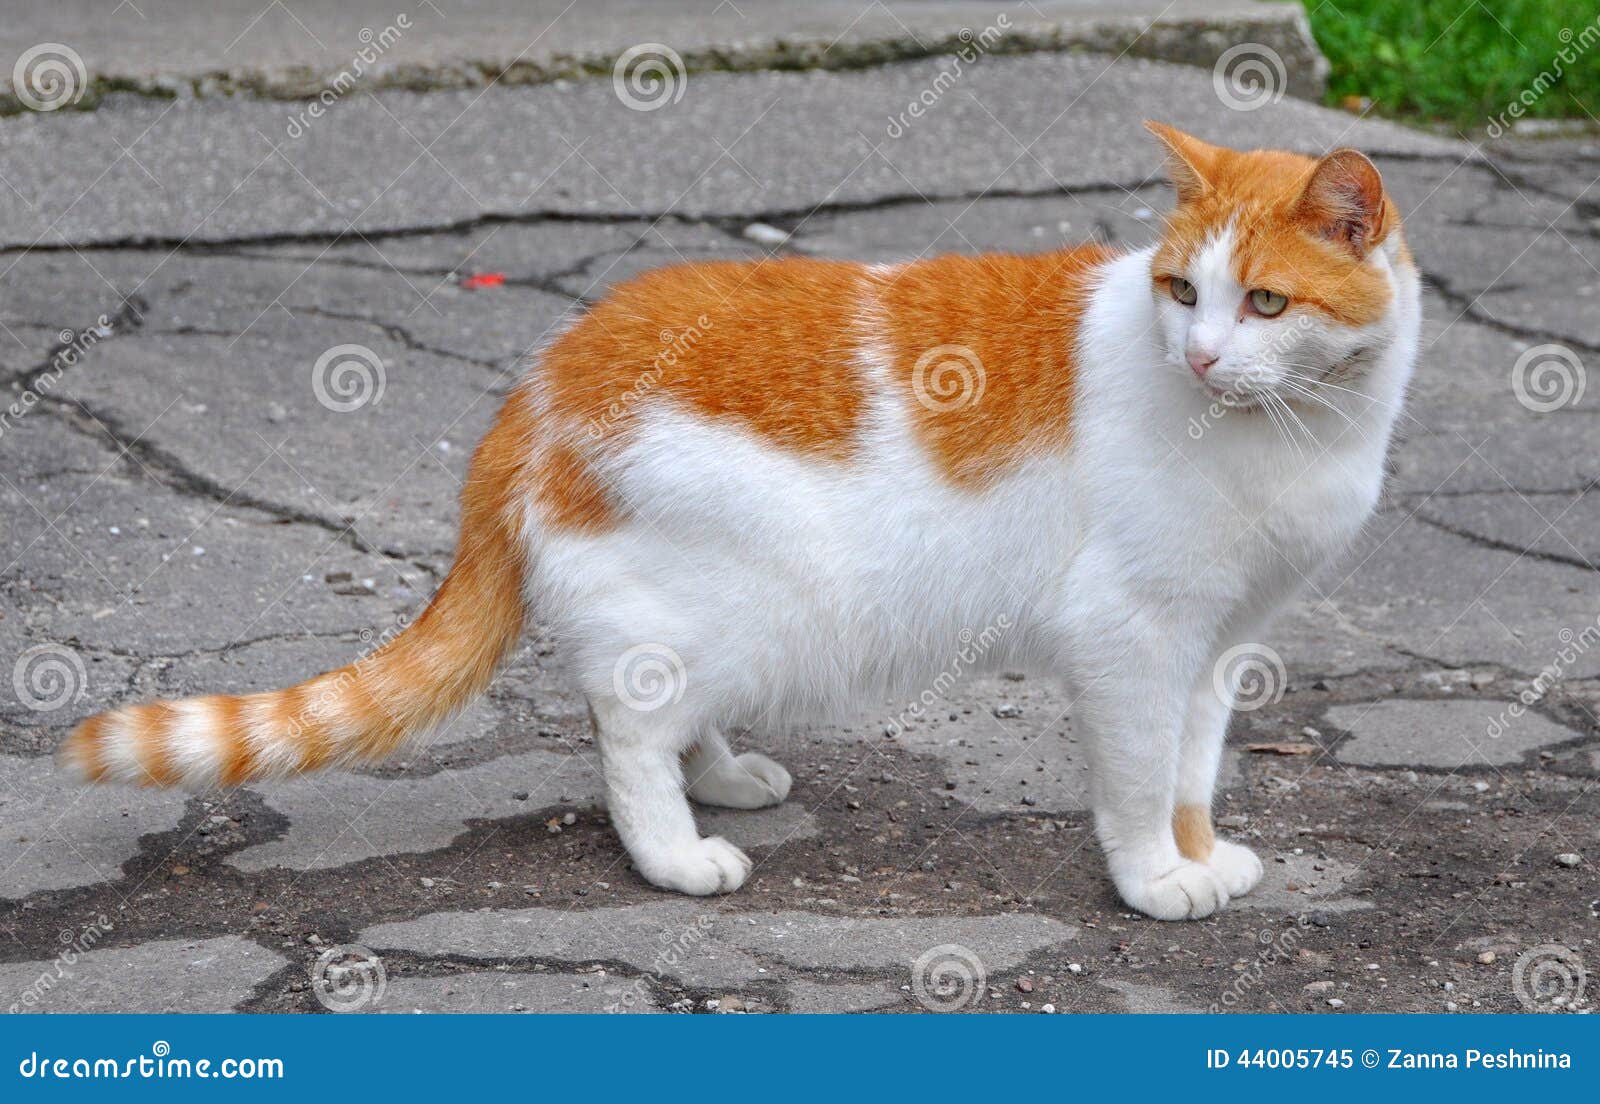  Cat  On The Paved Road Stock Photo Image 44005745